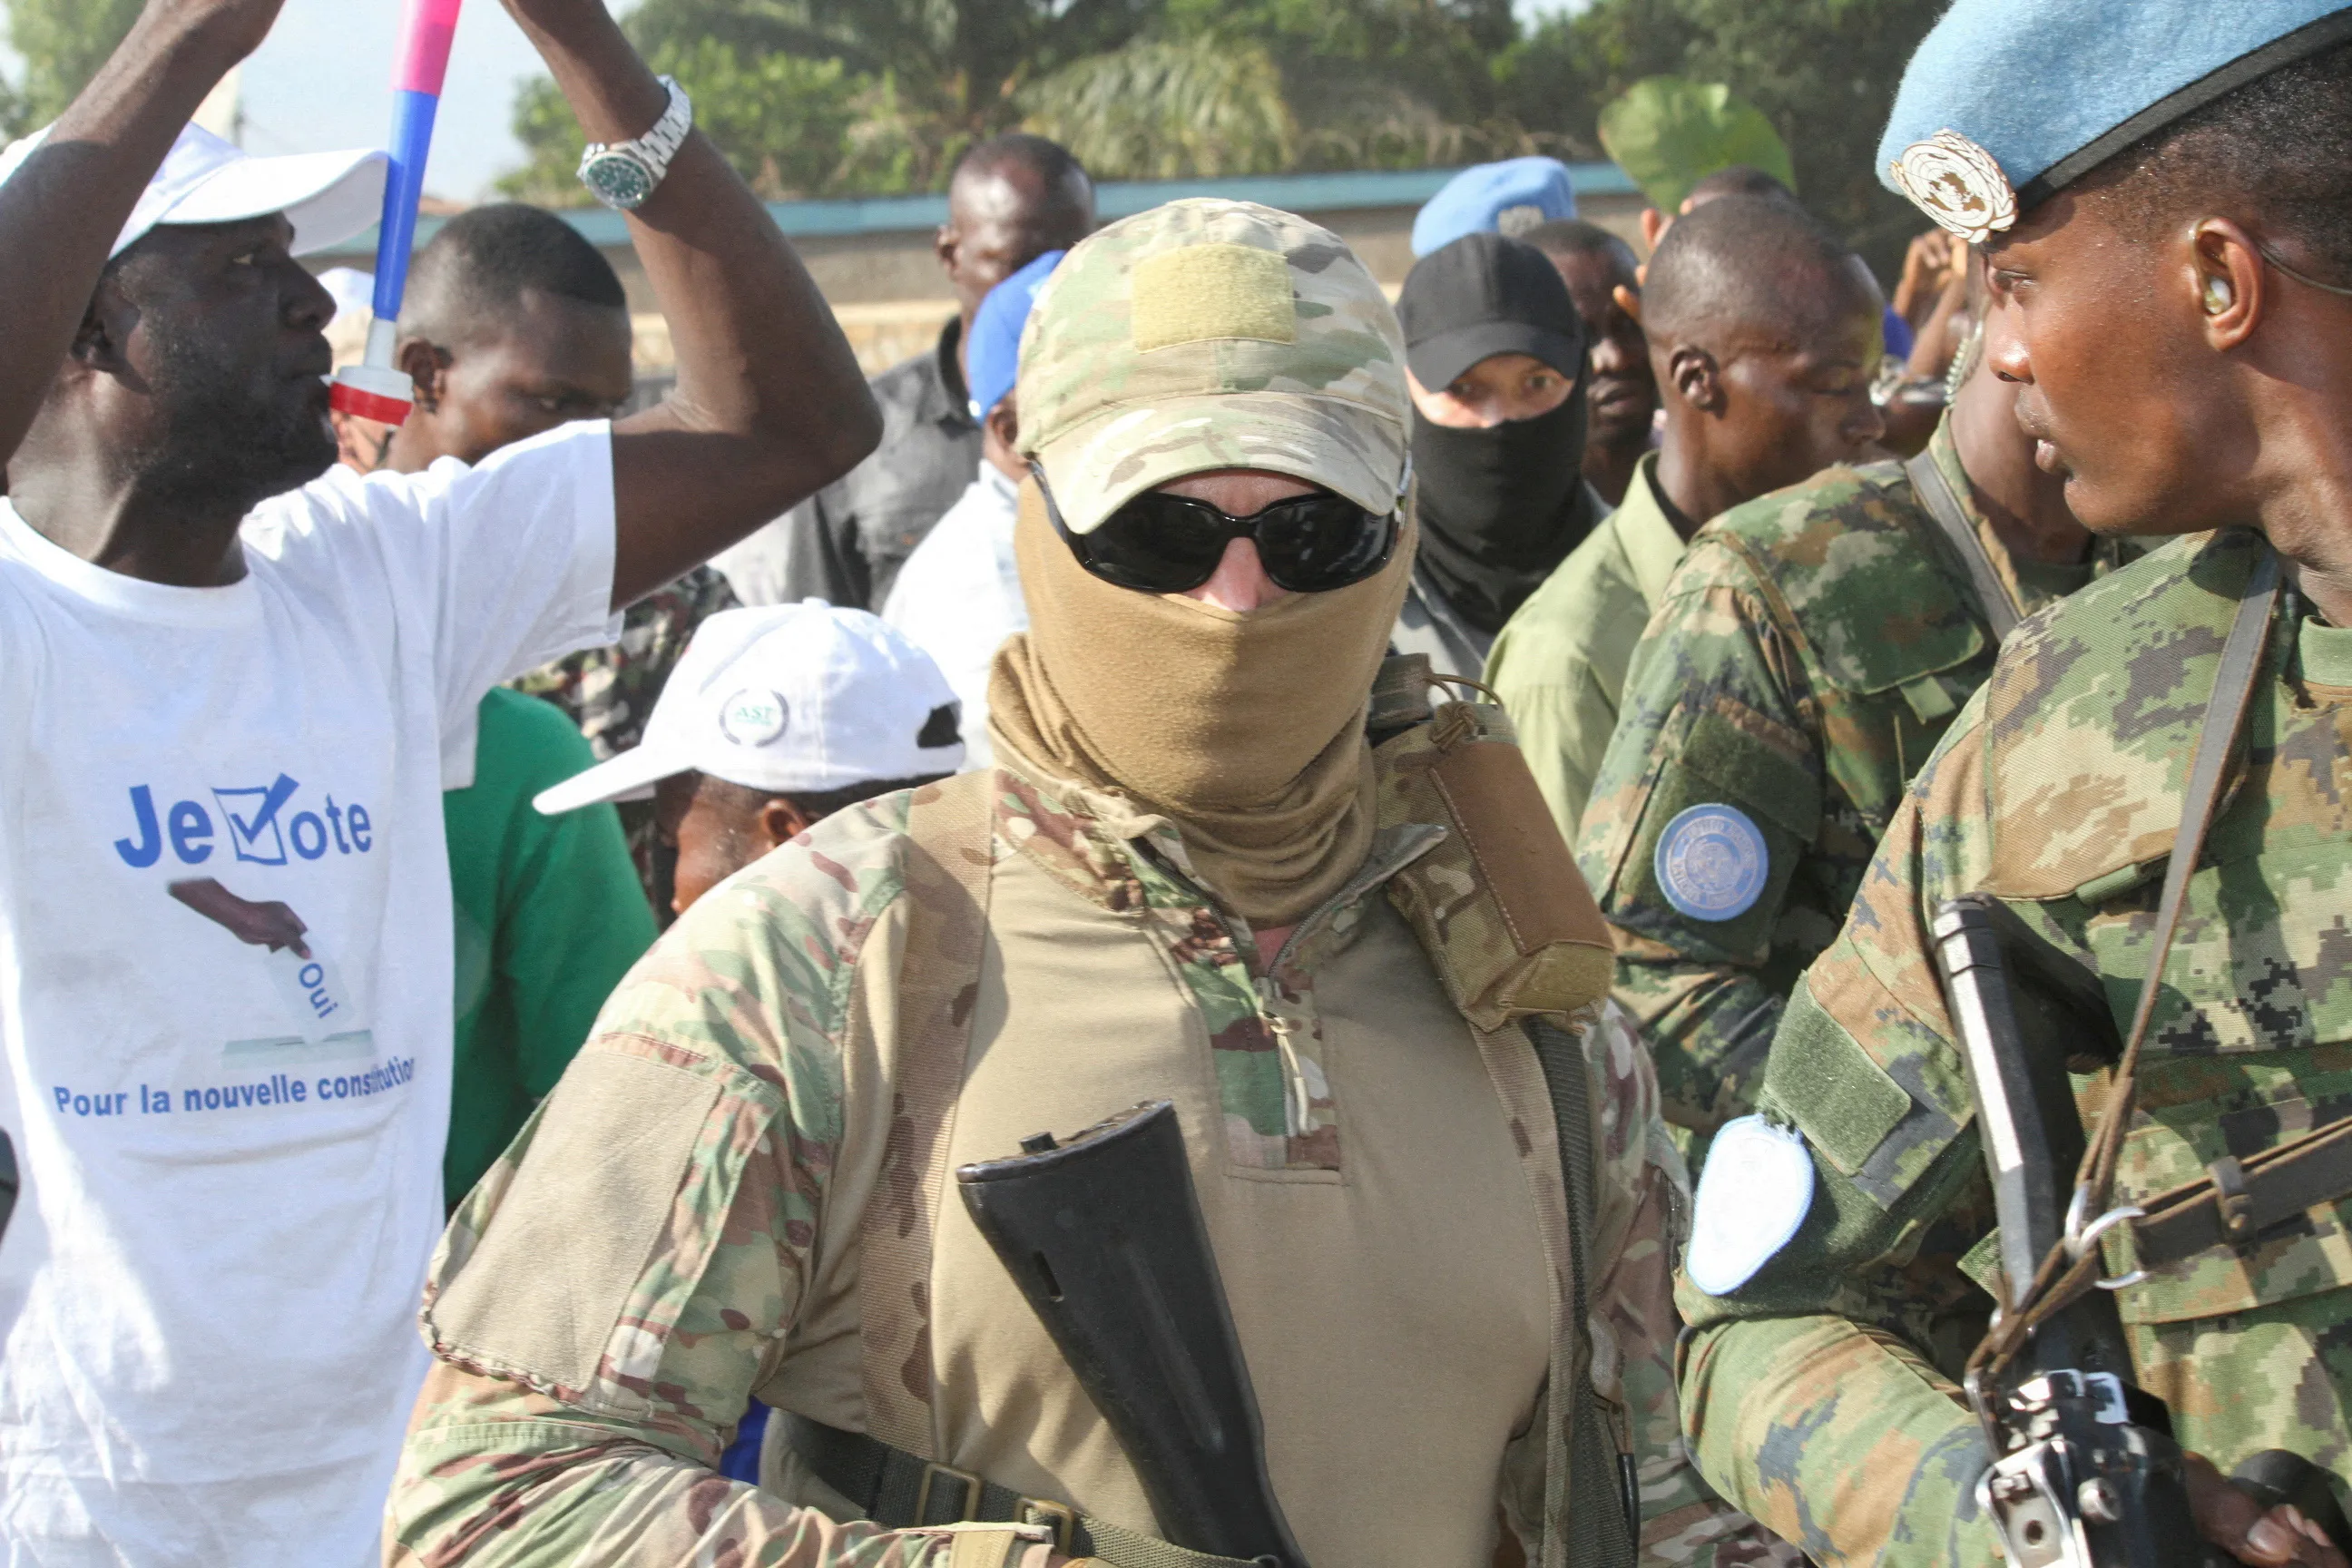 Russian mercenaries in Sudan: What is the Wagner Group's role